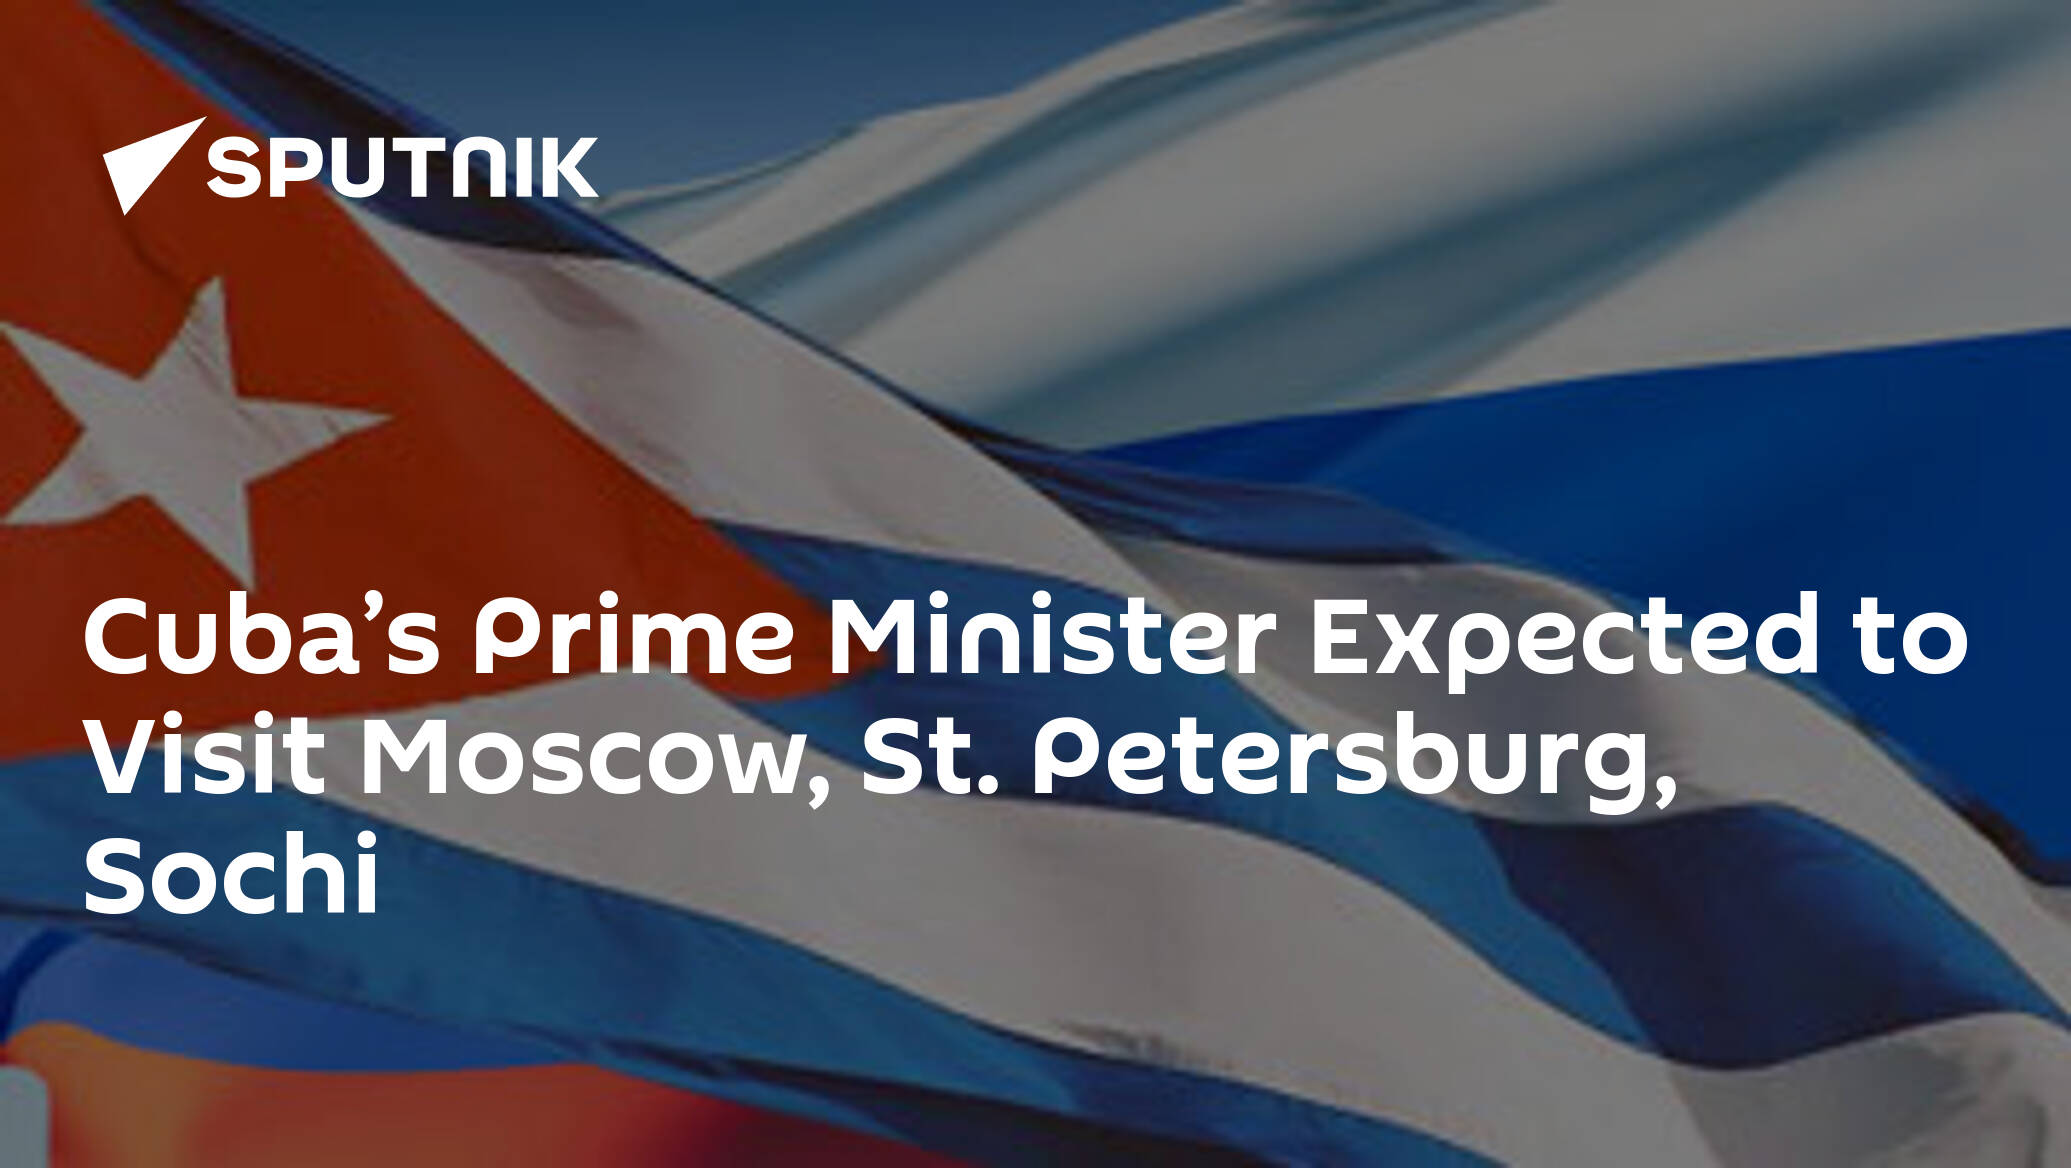 Cuba’s Prime Minister Expected to Visit Moscow, St. Petersburg, Sochi